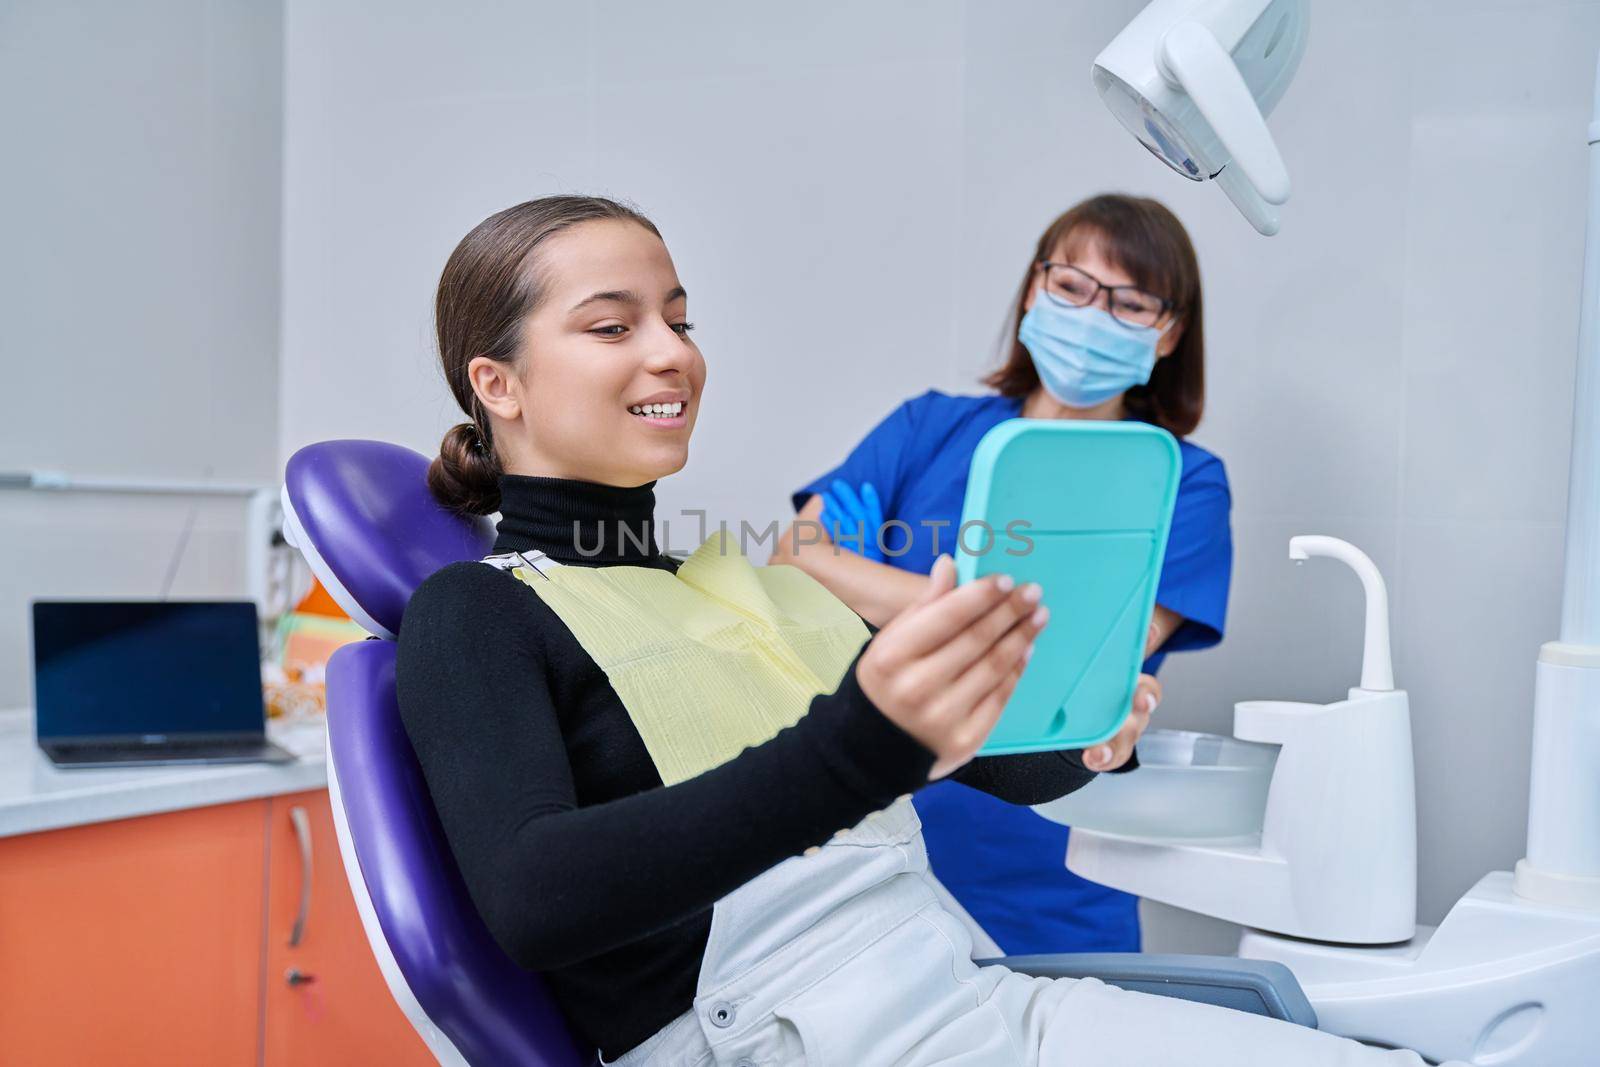 Happy young teenage female with mirror sitting in dentist chair smiling looking at healthy teeth, with dentist doctor in office. Dentistry, hygiene, treatment, dental health care concept